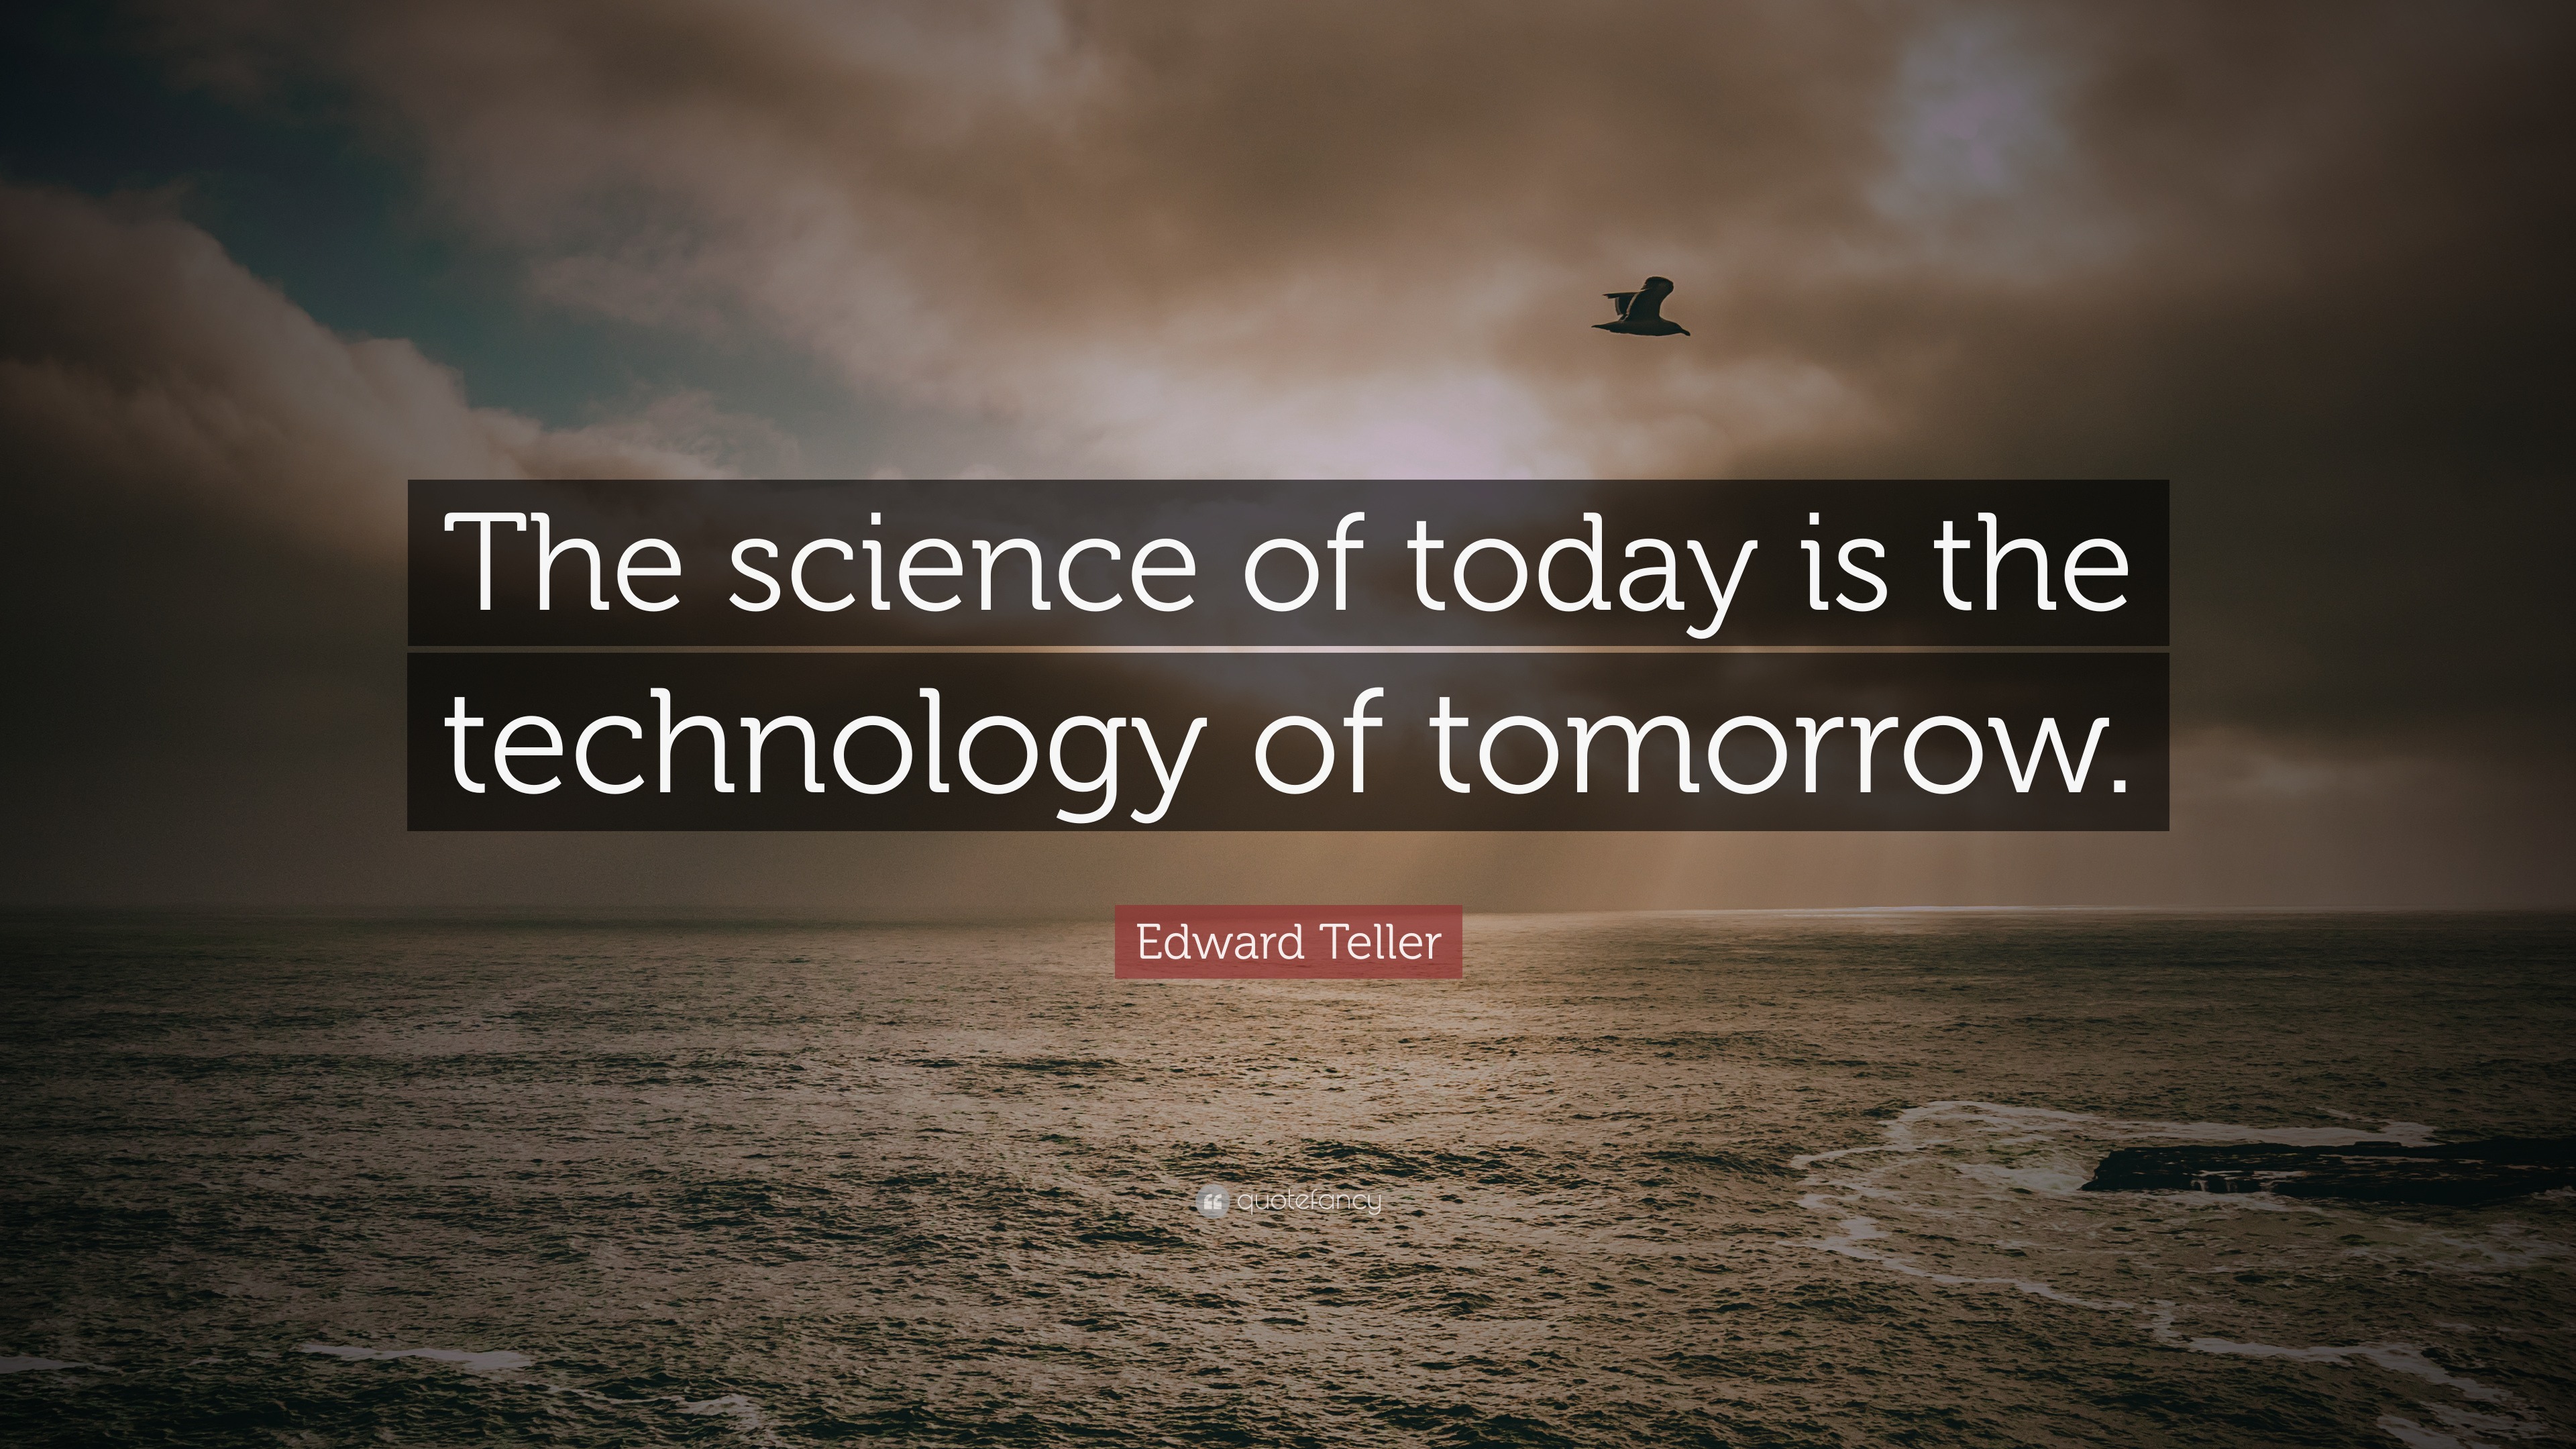 quotes on science and technology for essay